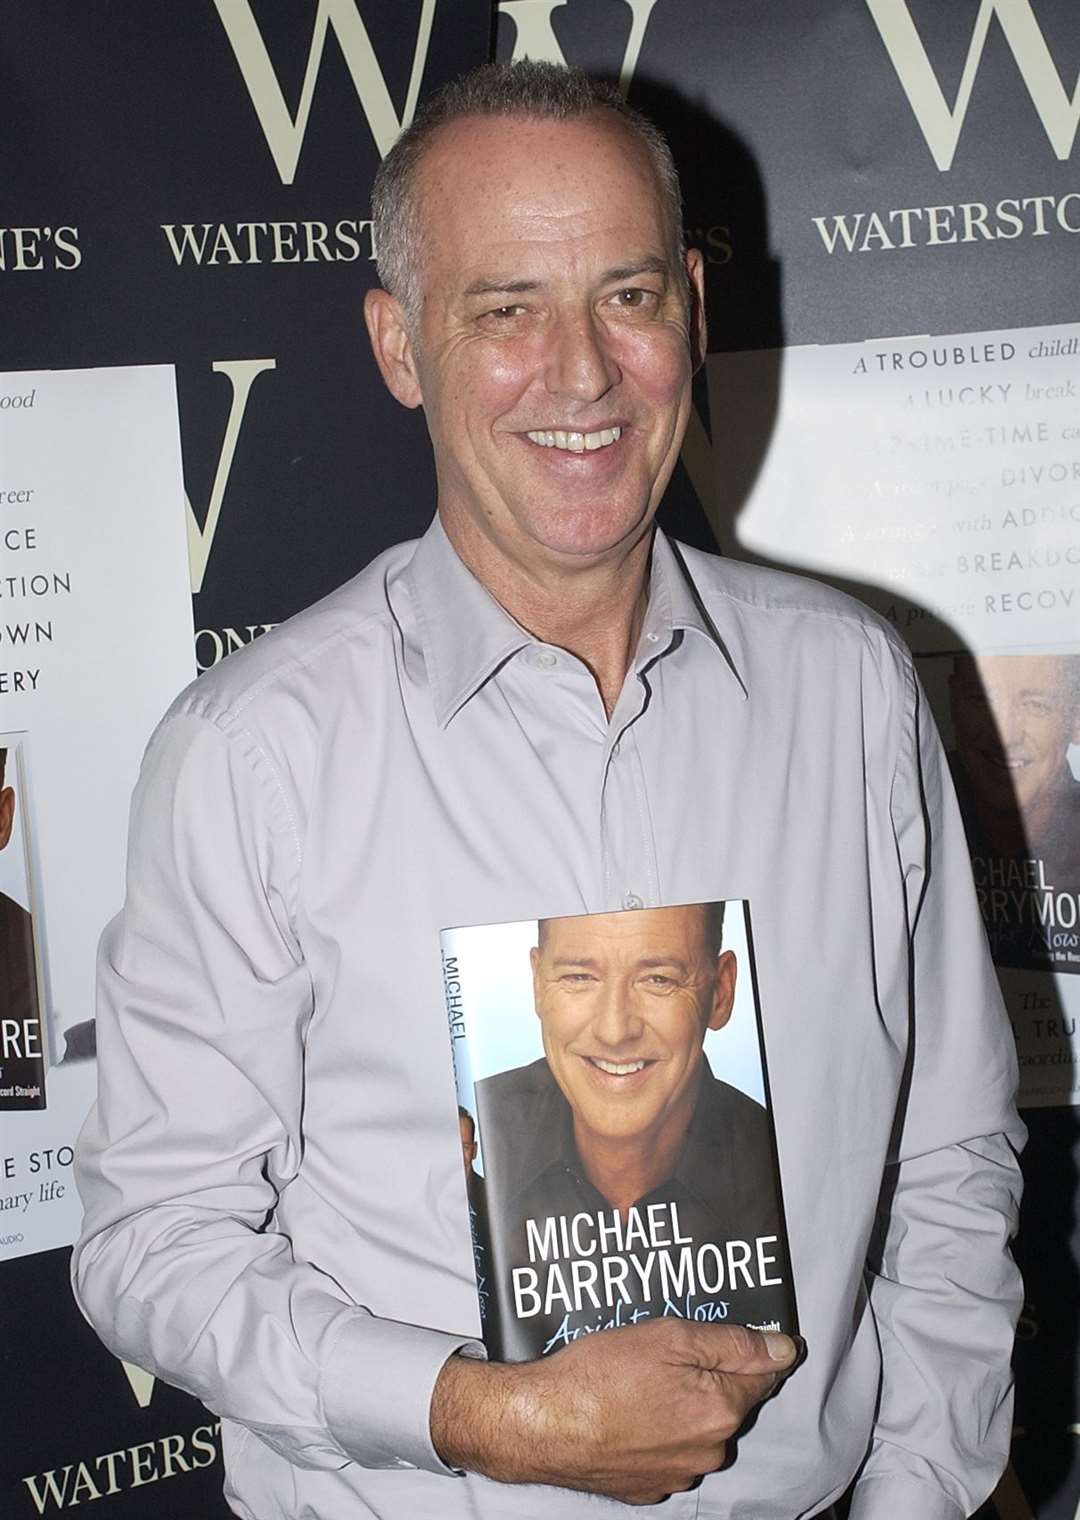 Micheal Barrymore